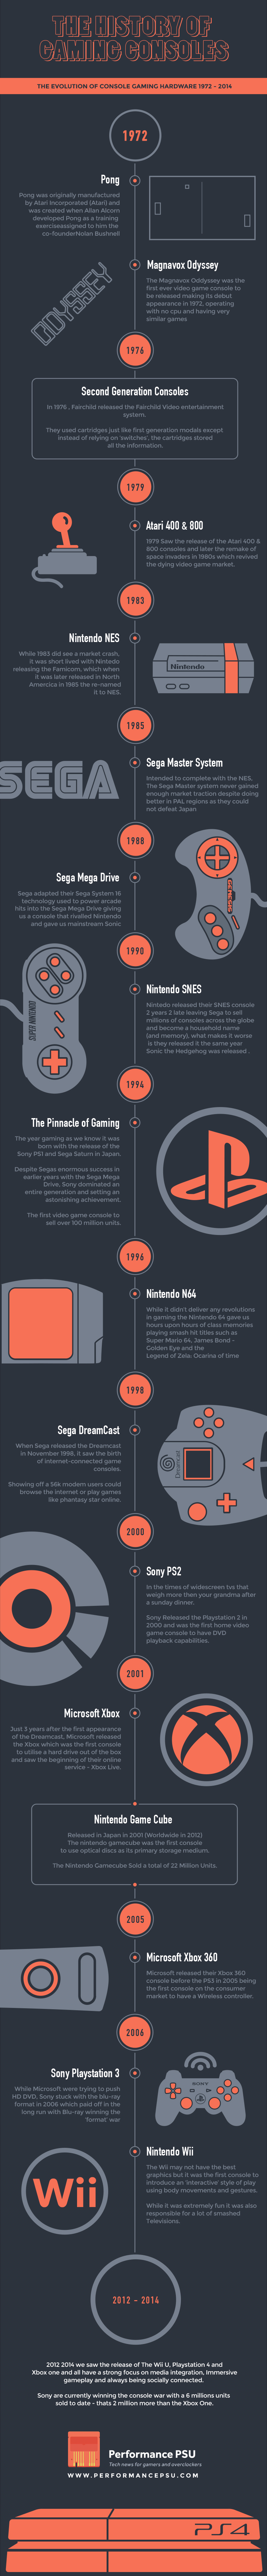  The History of Video Gaming Consoles 1972 – 2014